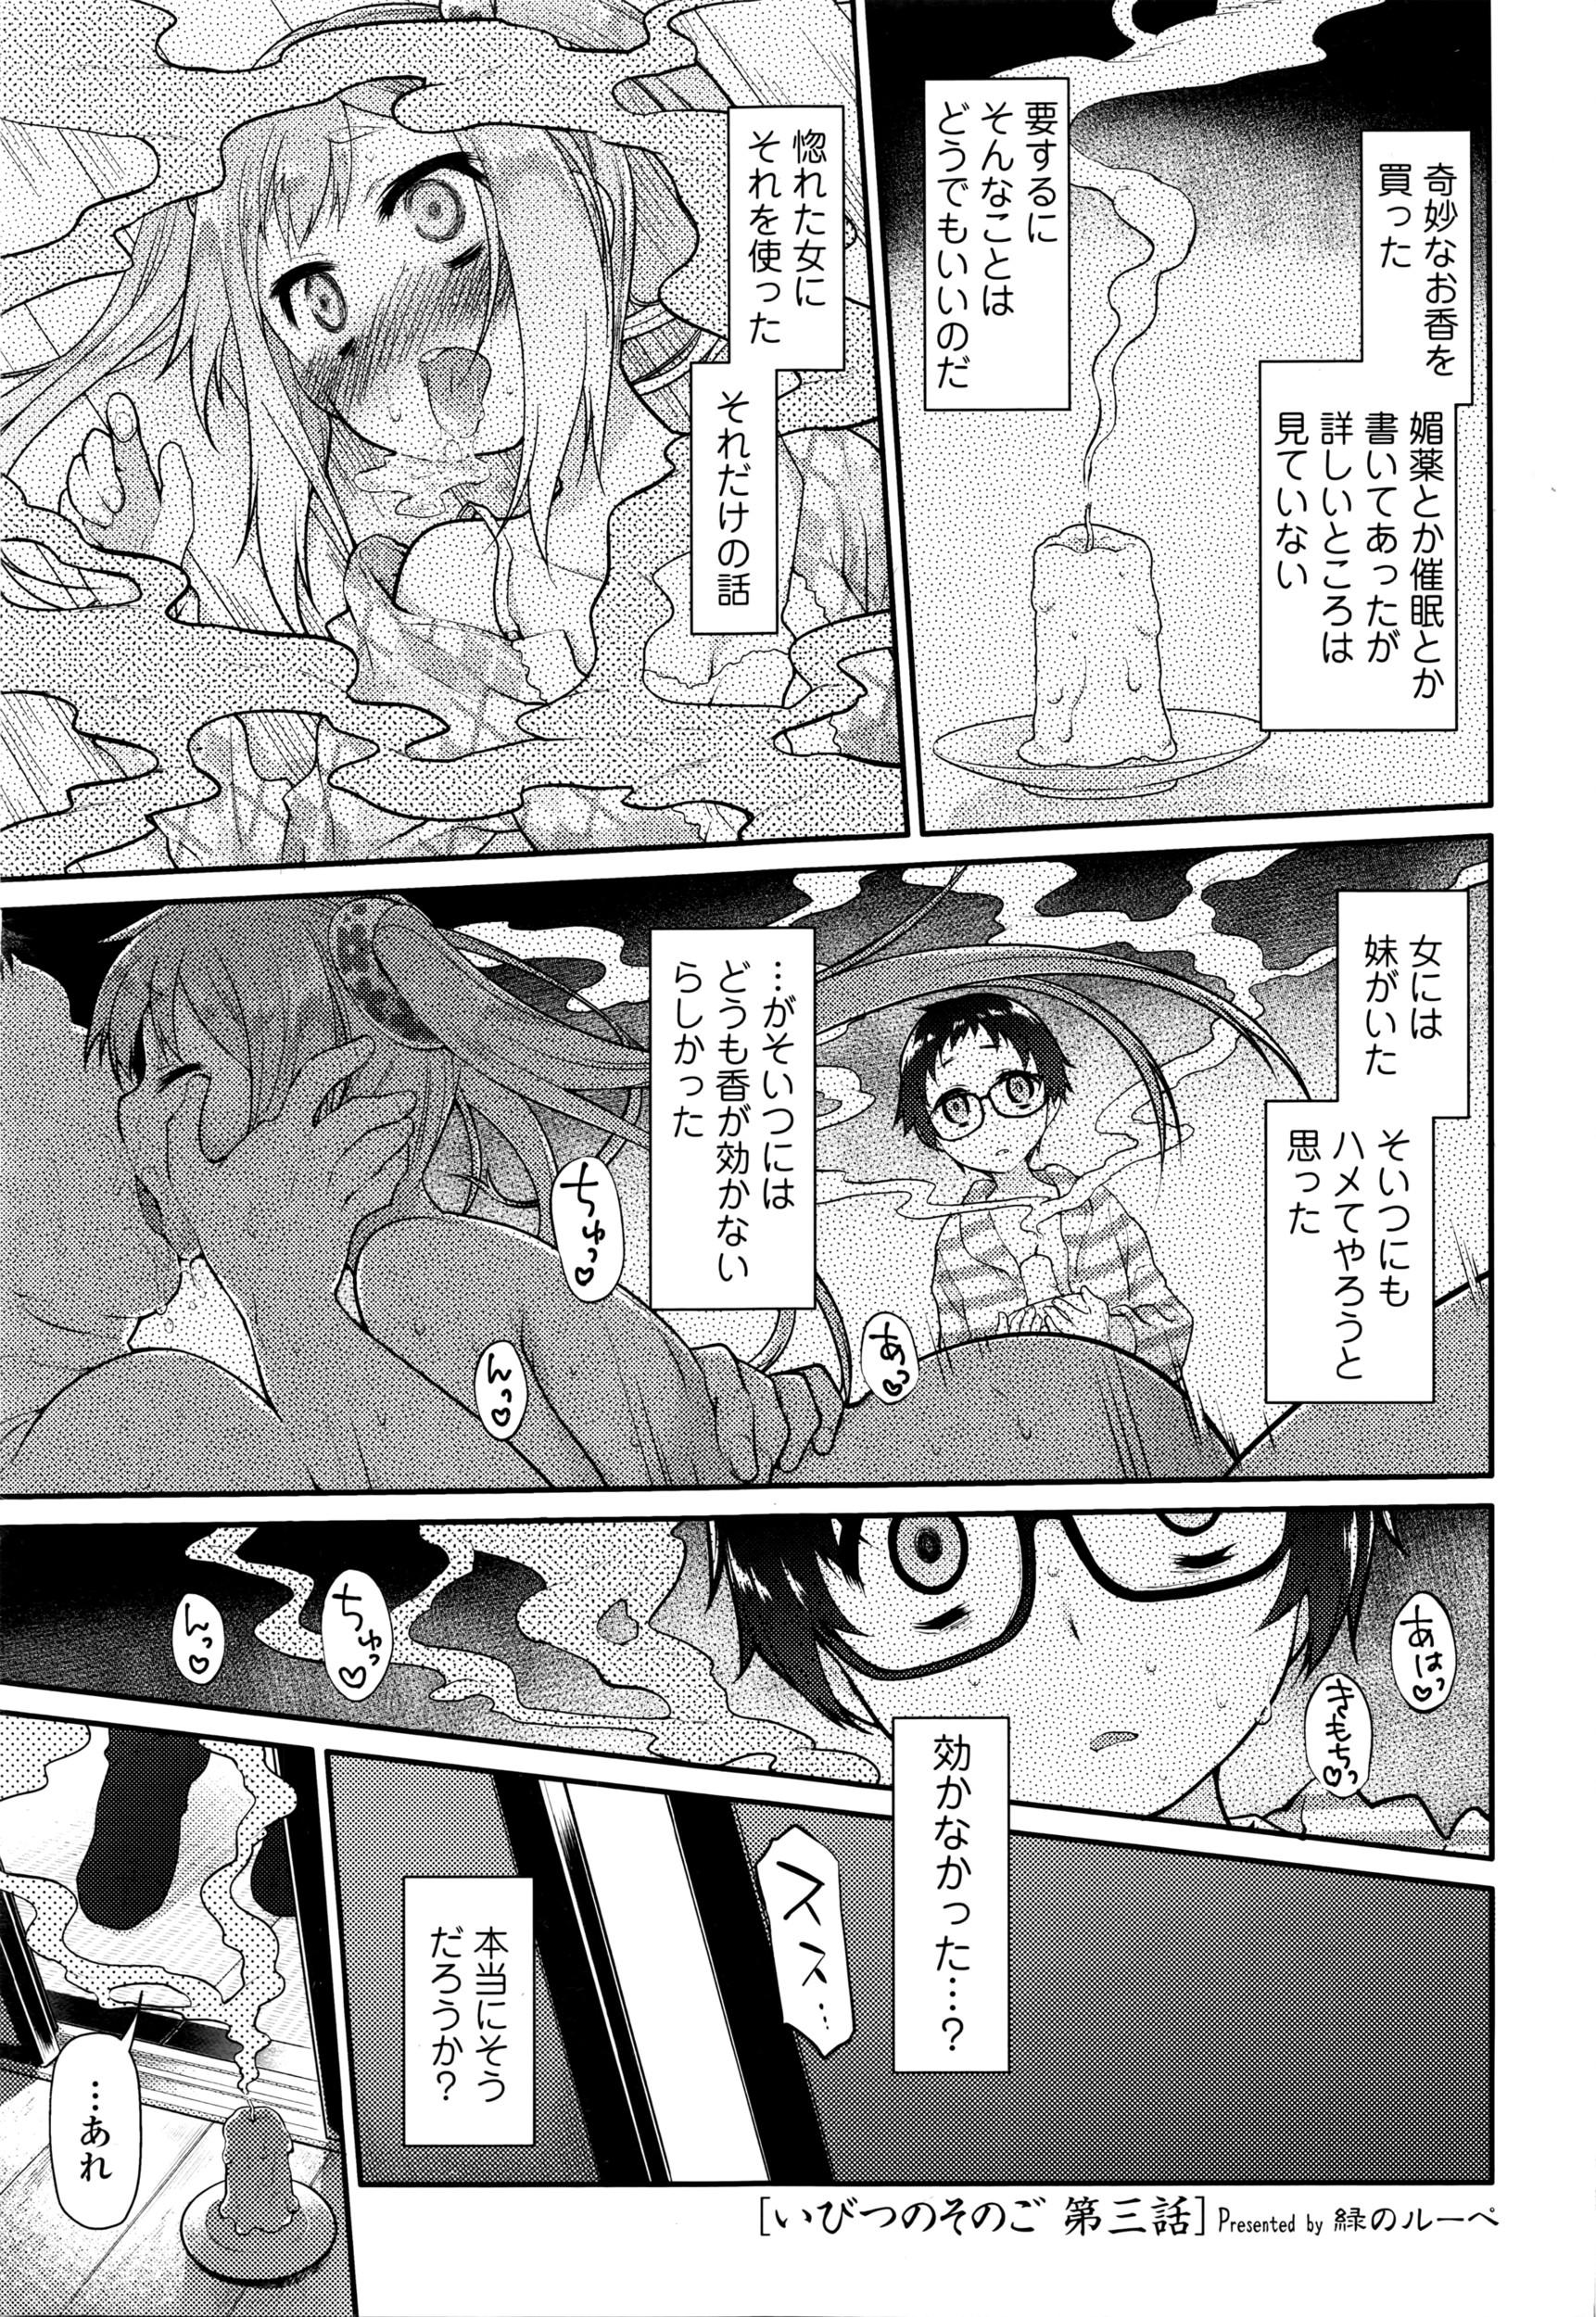 Naturaltits COMIC Tenma 2016-04 Wives - Page 6